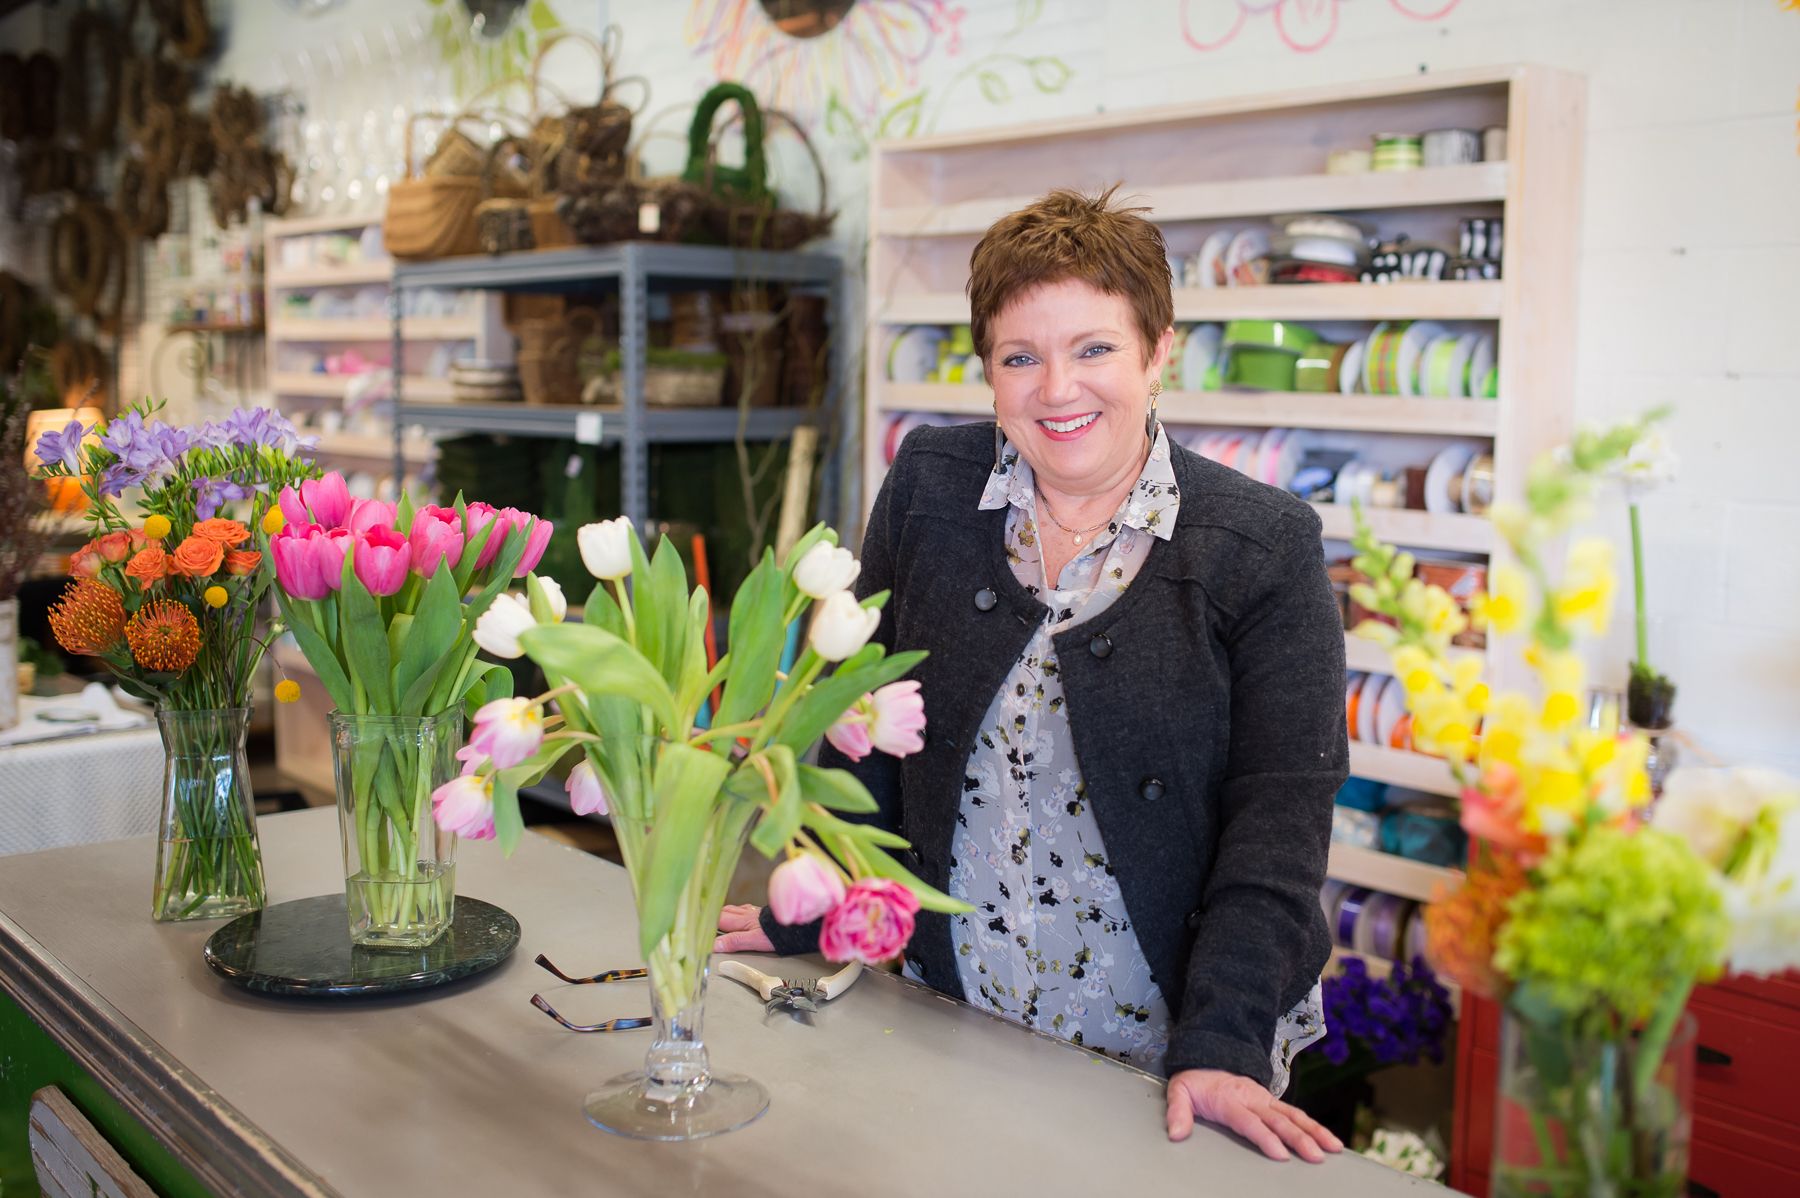 Sami Price, owner of Just Priceless, stands smiling at a counter with several vases of cut flowers.